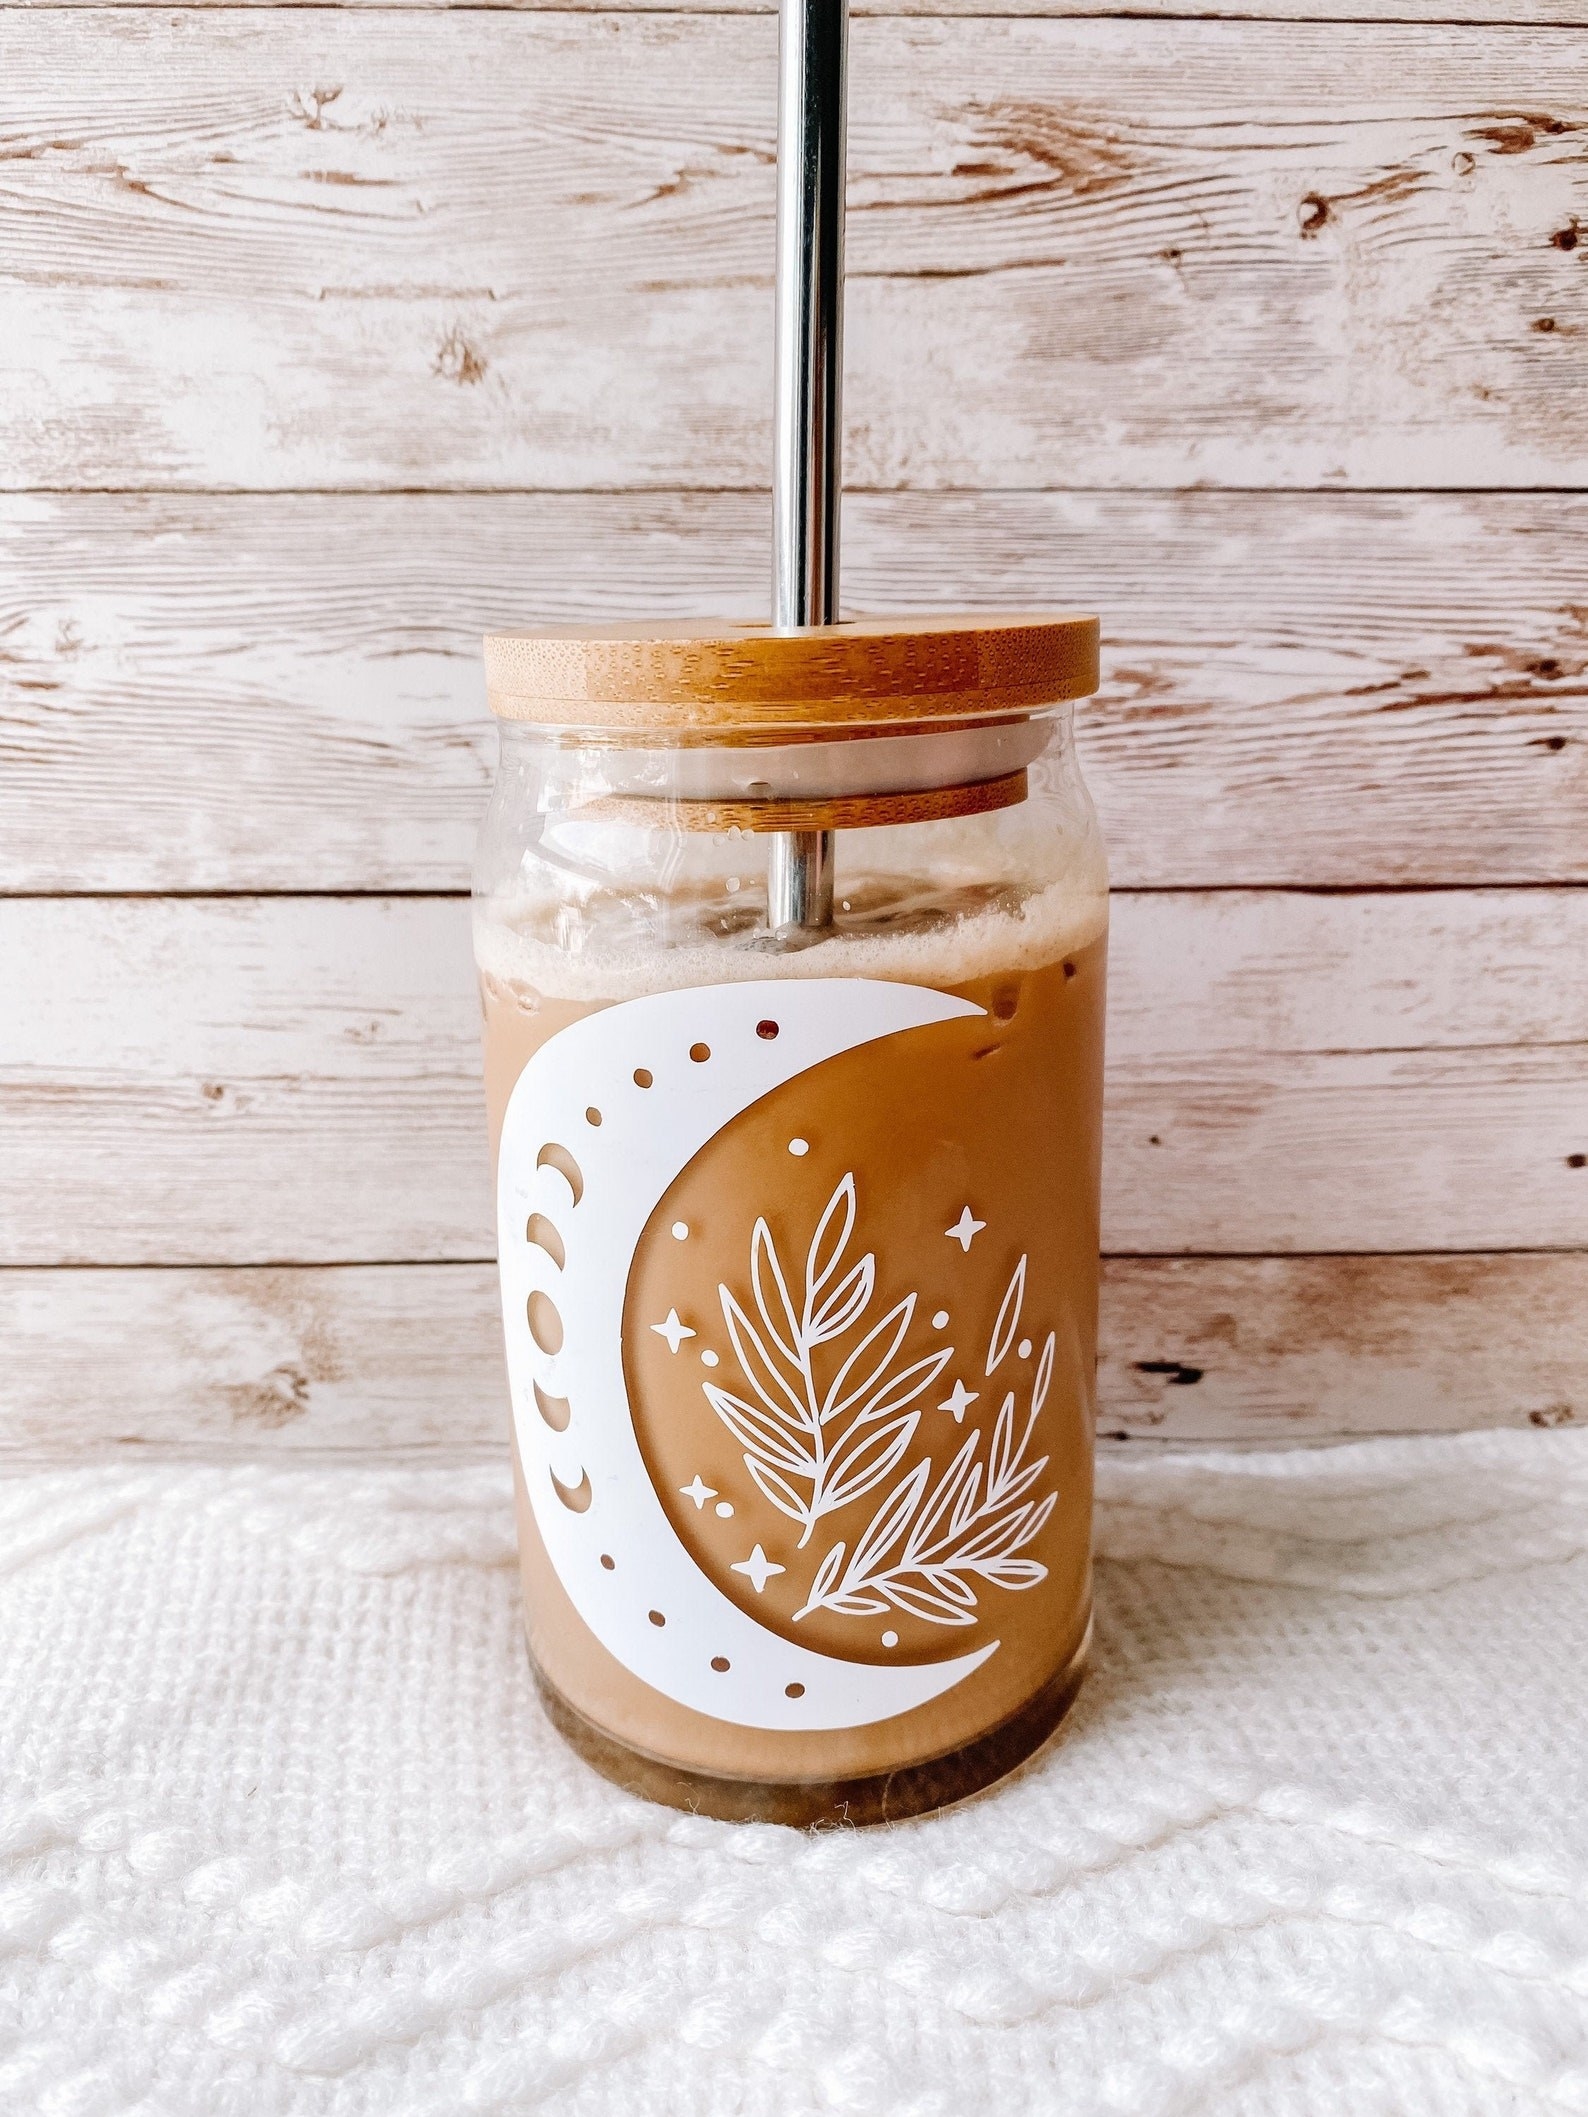 A glass cup with iced coffee inside and a decal of a moon and leaves on the front